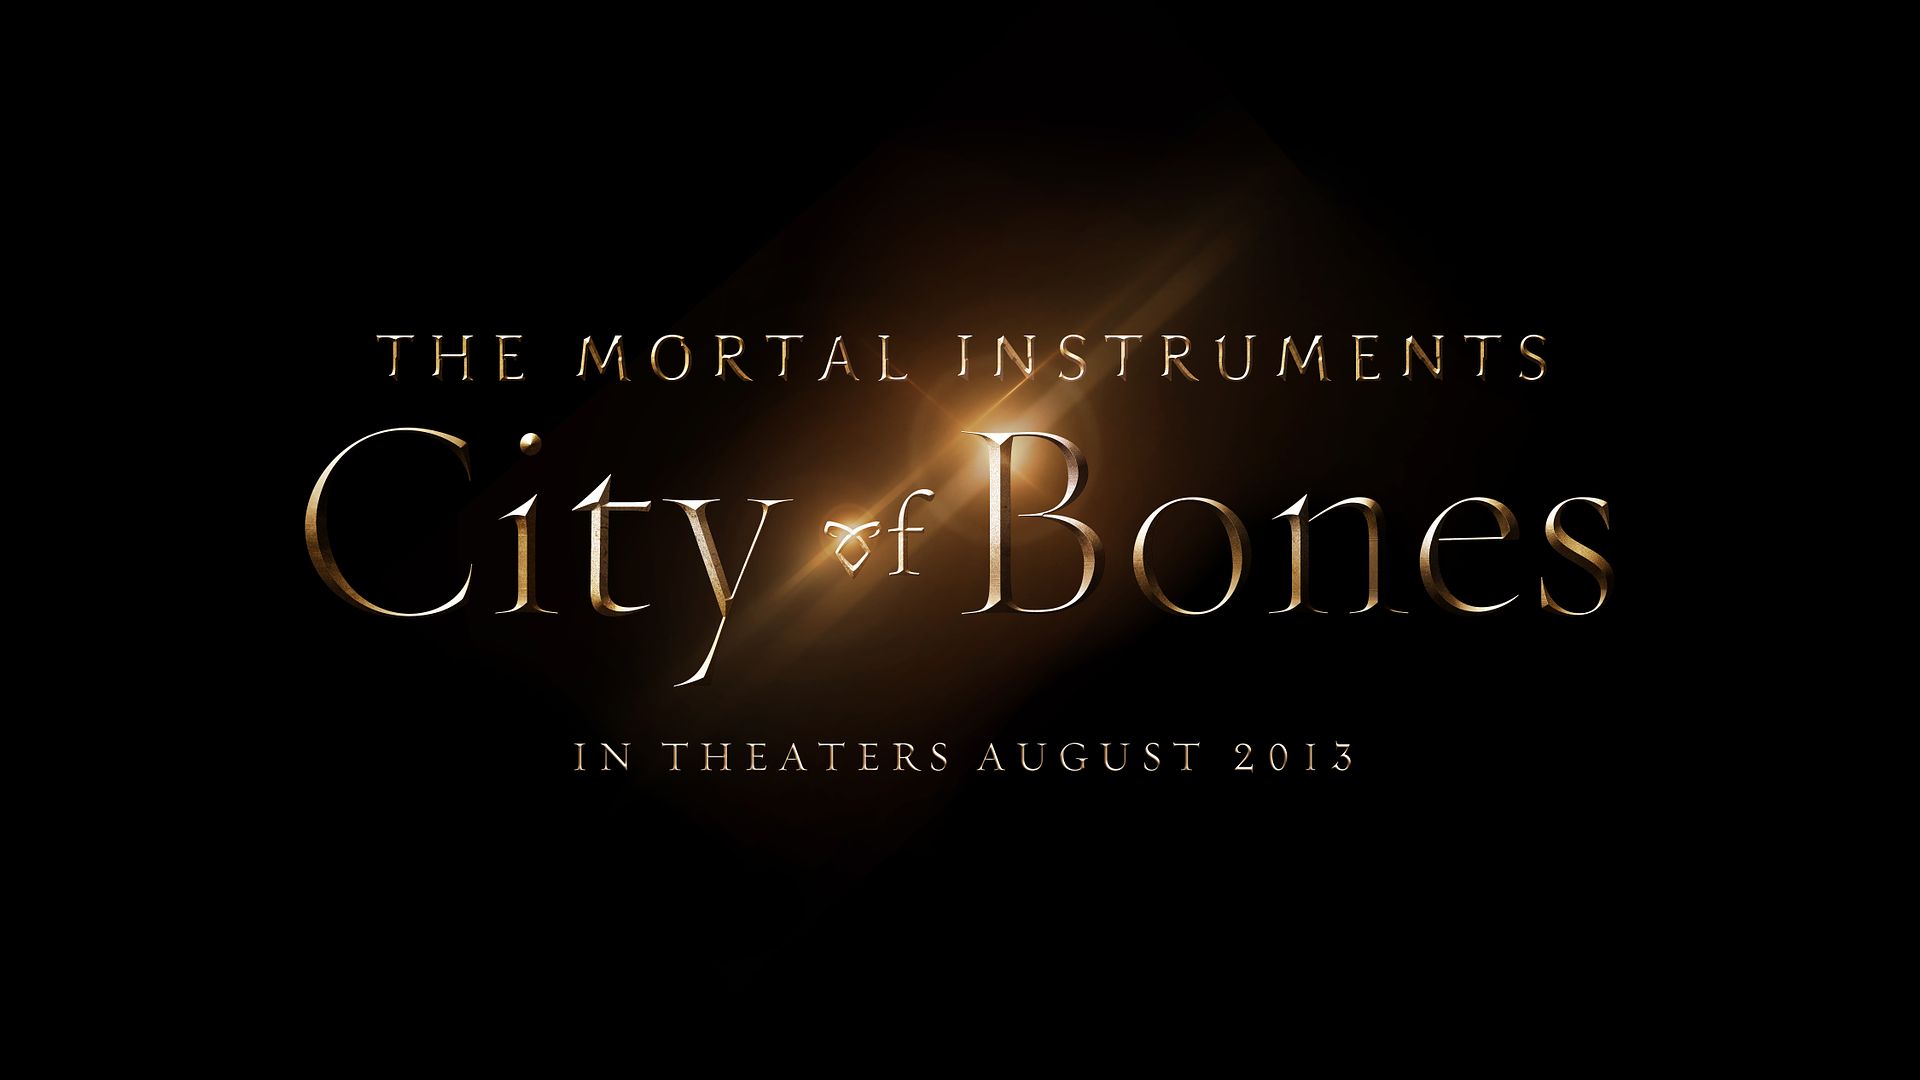 Like the official Facebook page to learn all about The Mortal Instruments: City of Bones movie!